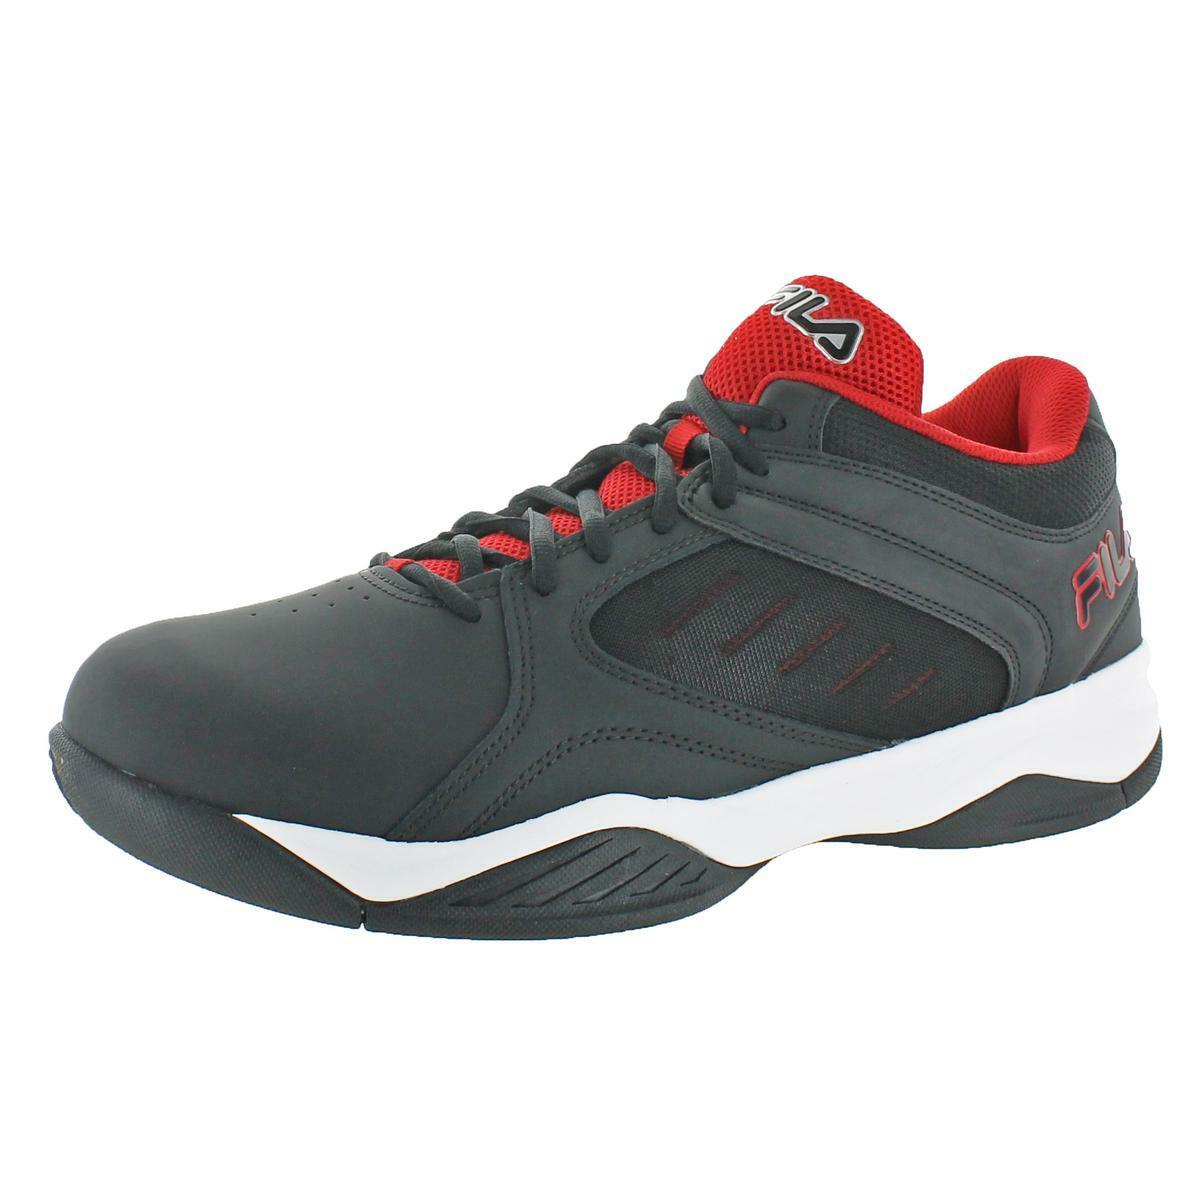 FILA 7846 Mens Bank Leather Lightweight Basketball Shoes Sneakers BHFO